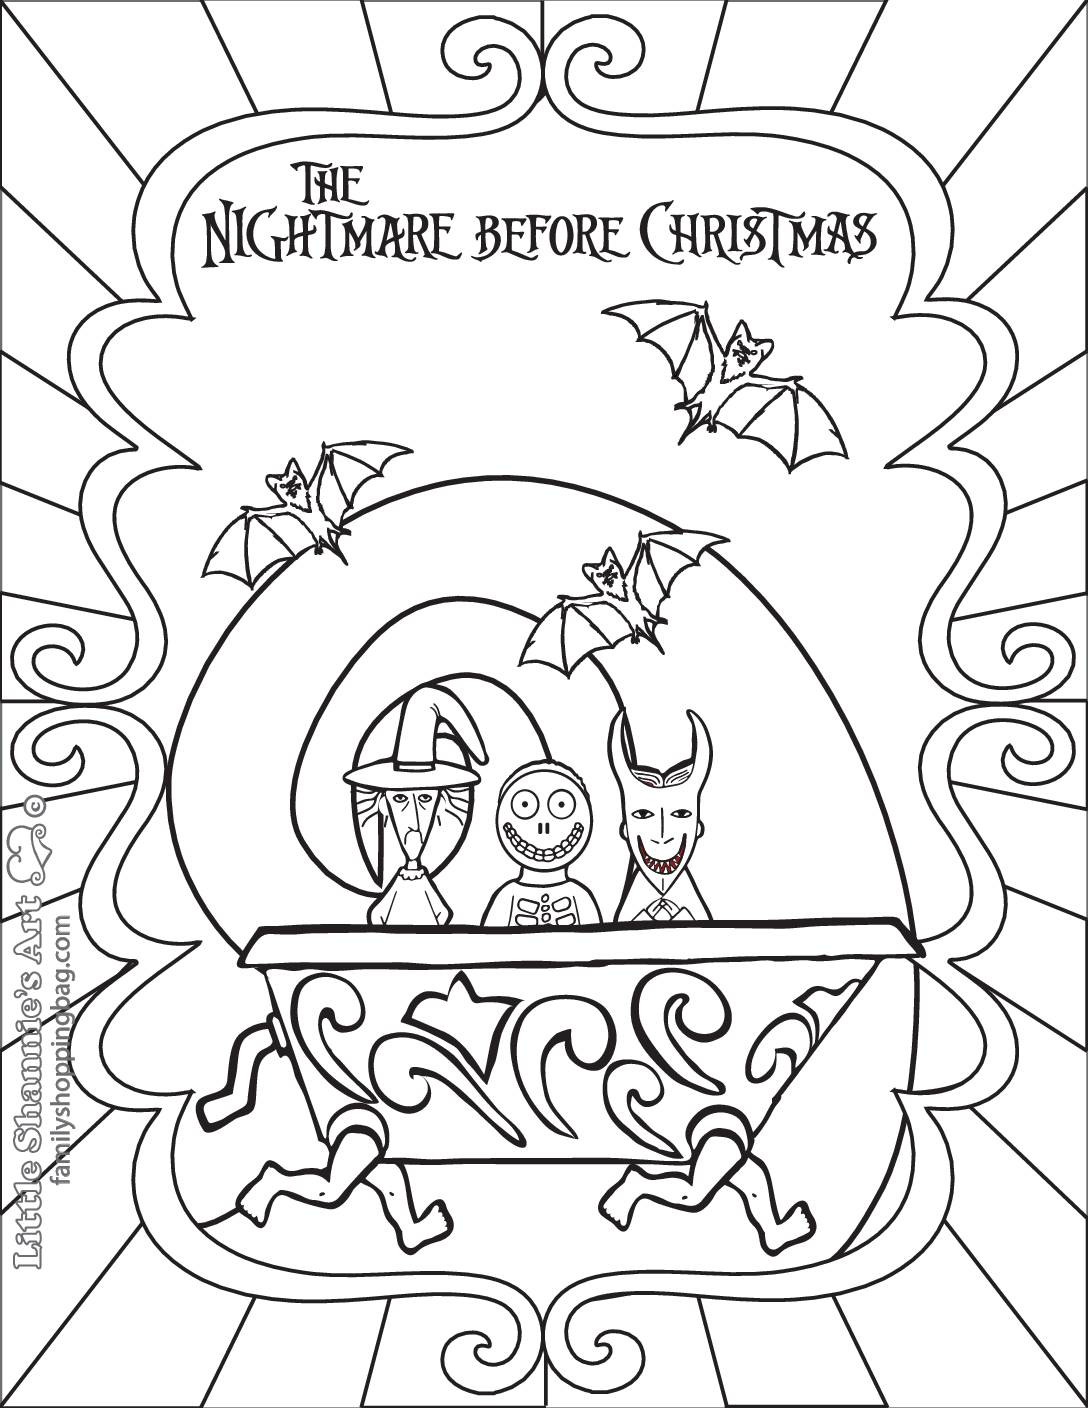 Coloring page nightmare bc